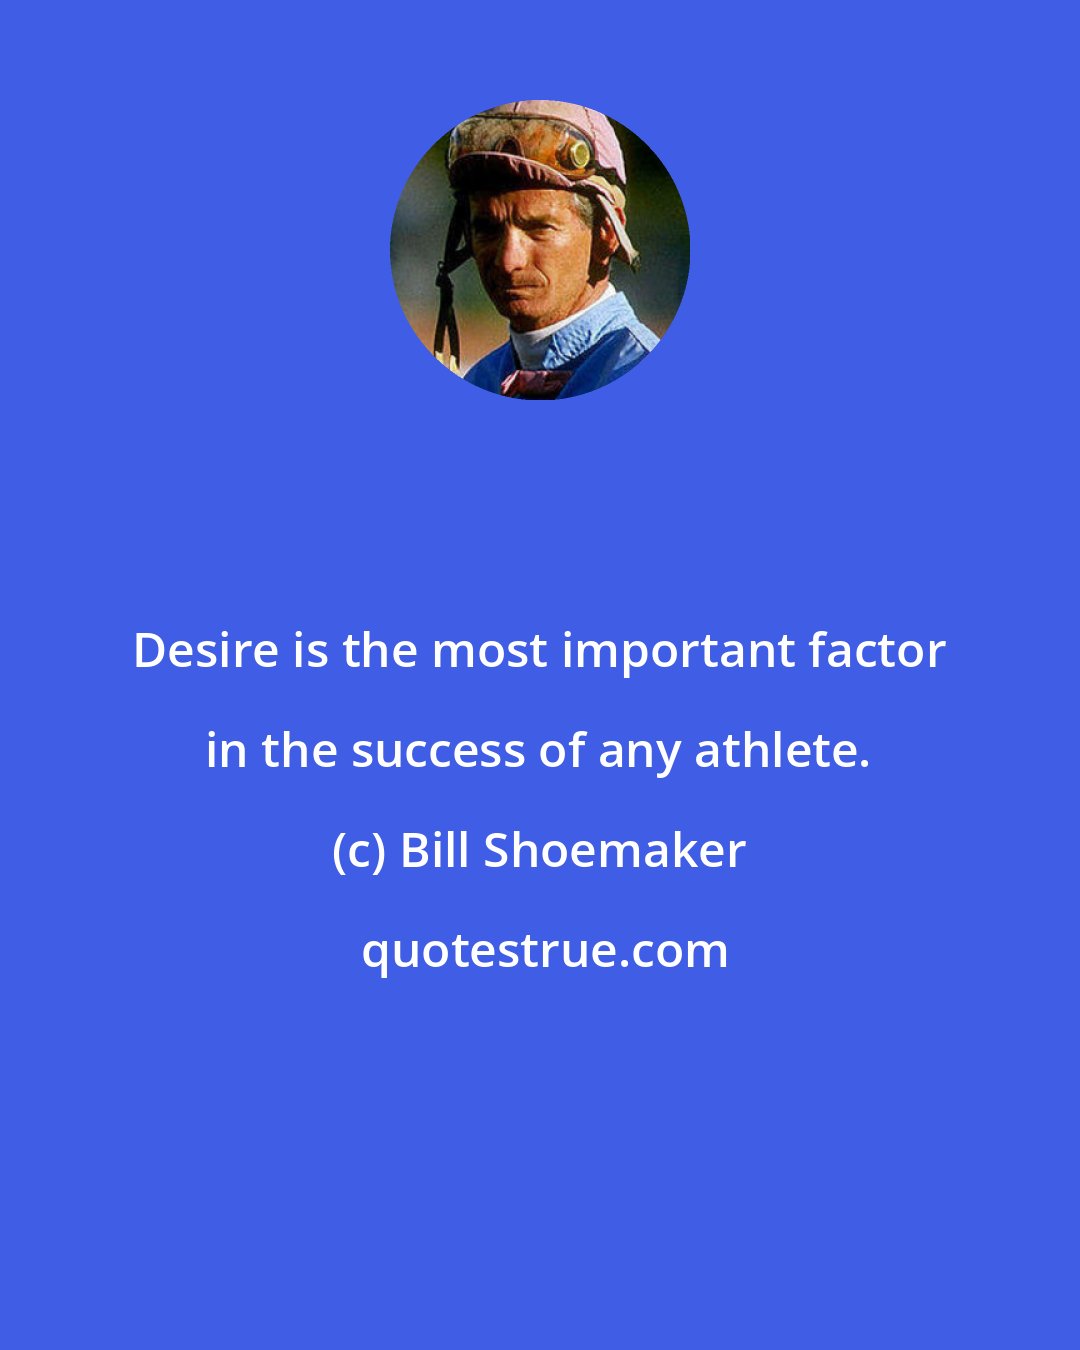 Bill Shoemaker: Desire is the most important factor in the success of any athlete.